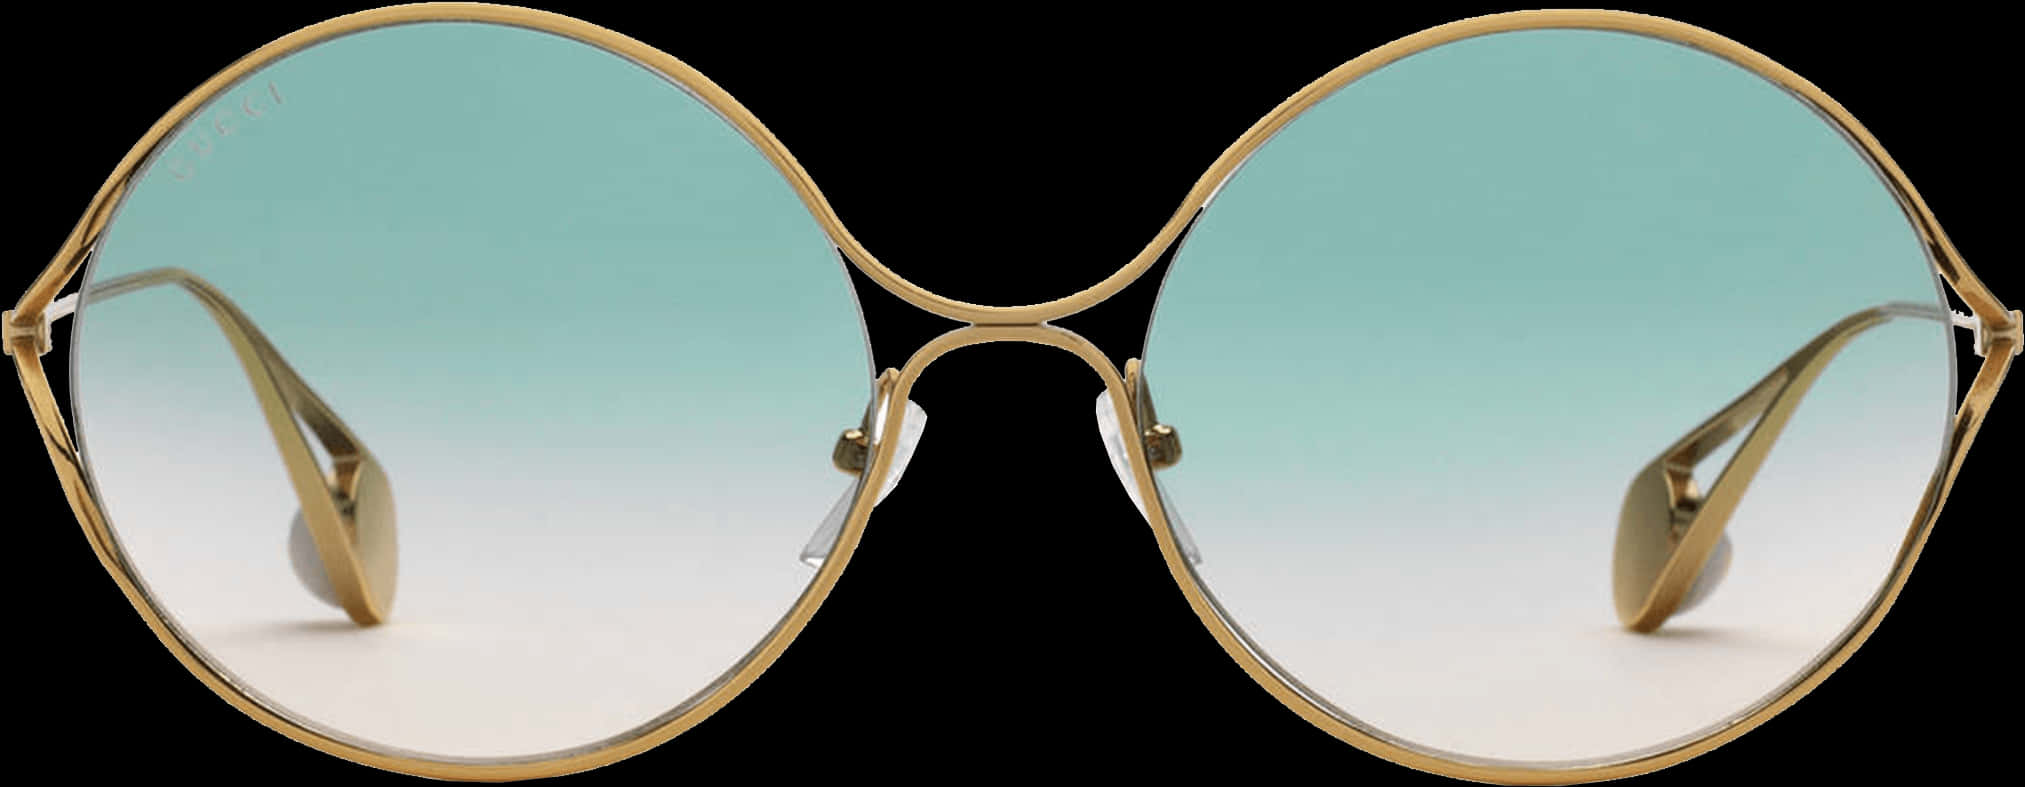 Gold Rimmed Round Glasses PNG image